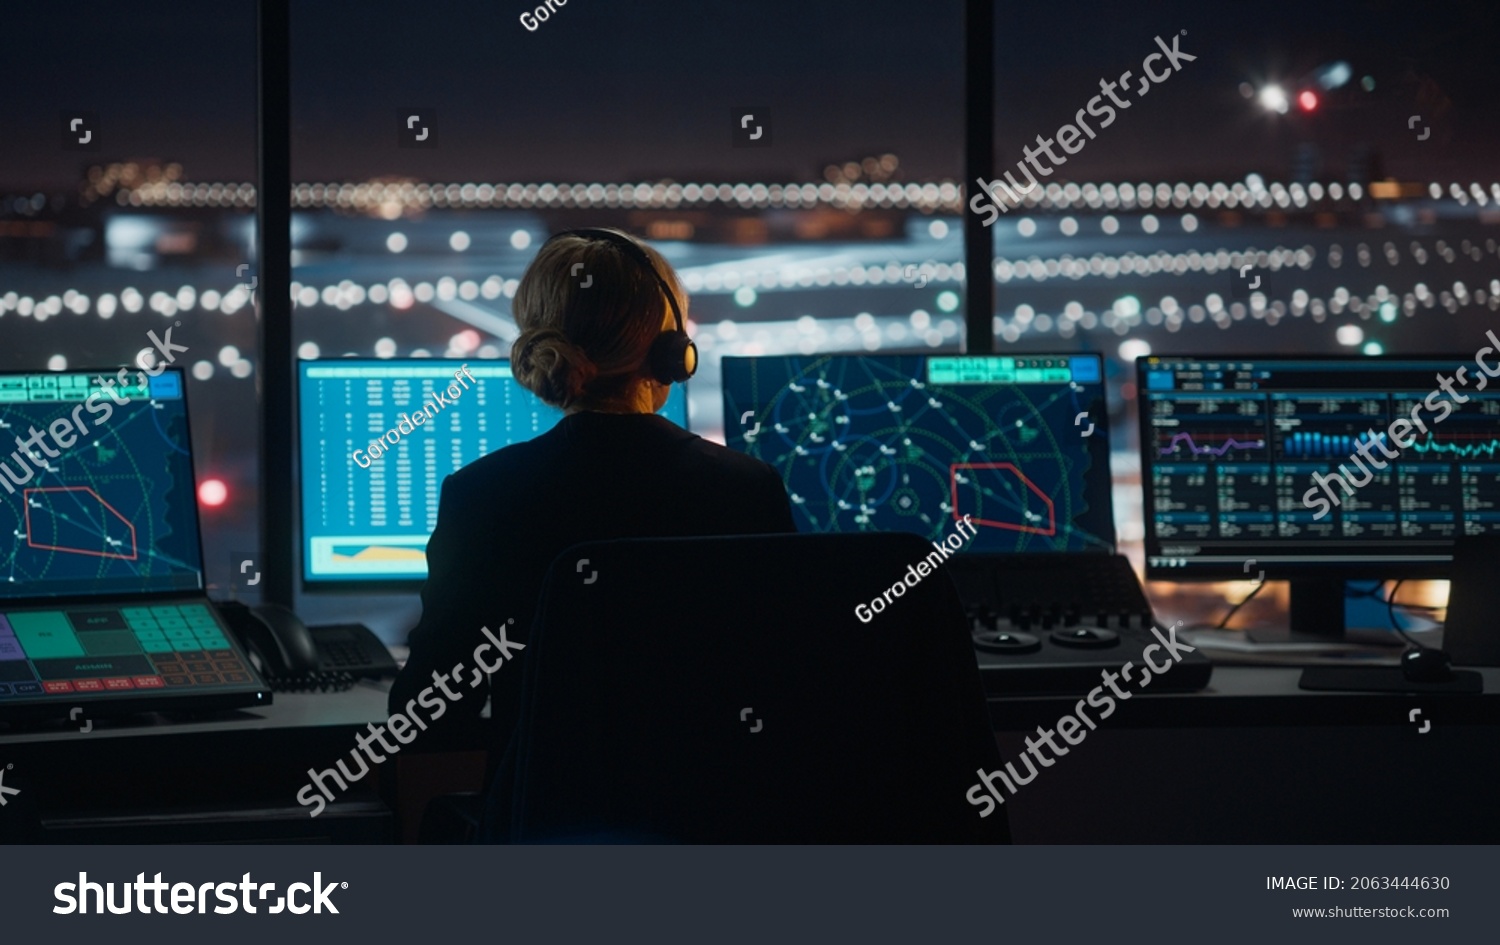 Female Air Traffic Controller with Headset Talk on a Call in Airport Tower at Night. Office Room is Full of Desktop Computer Displays with Navigation Screens, Airplane Flight Radar Data for the Team. #2063444630